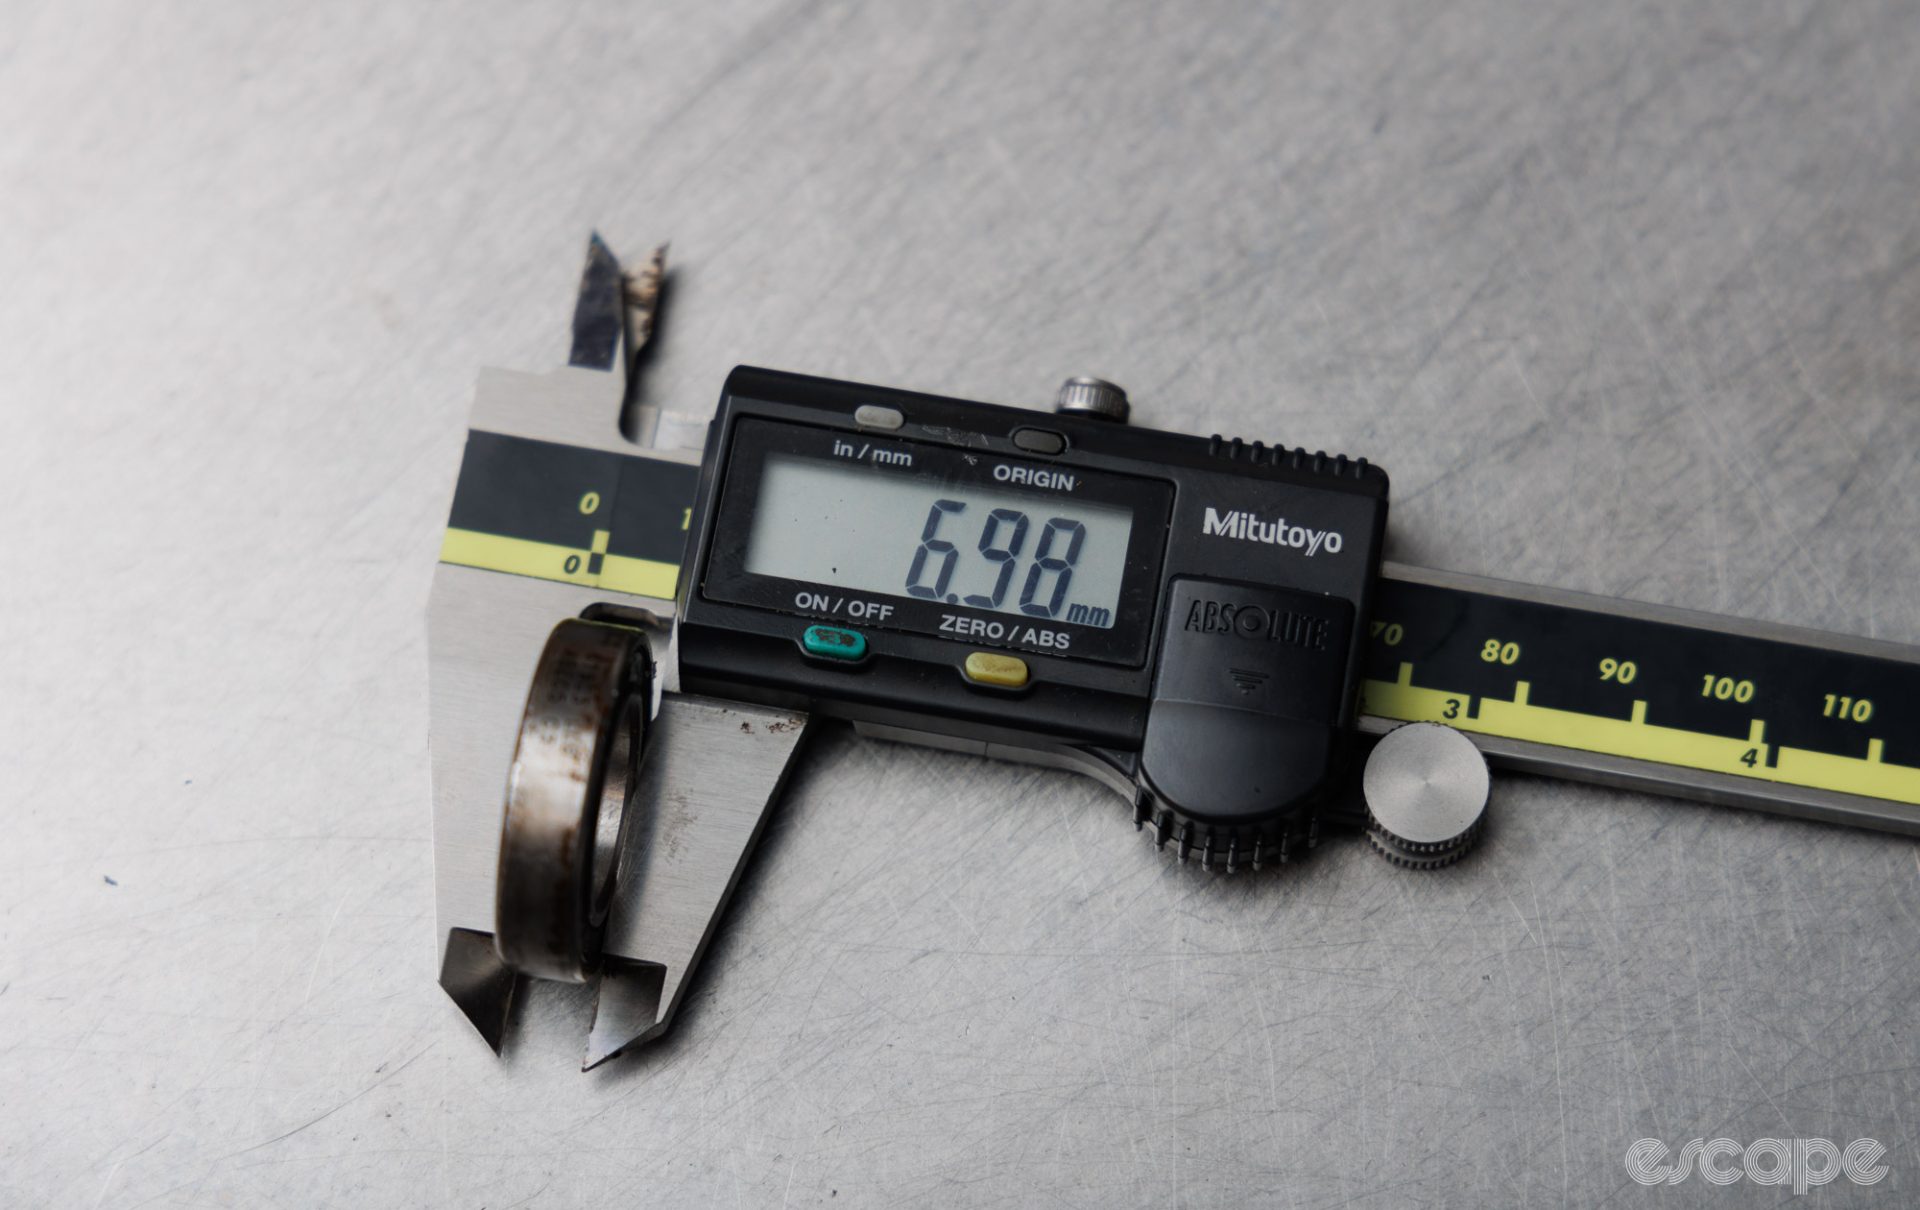 The height of a cartridge bearing is measured with digital calipers. The calipers read 6.98 mm. 